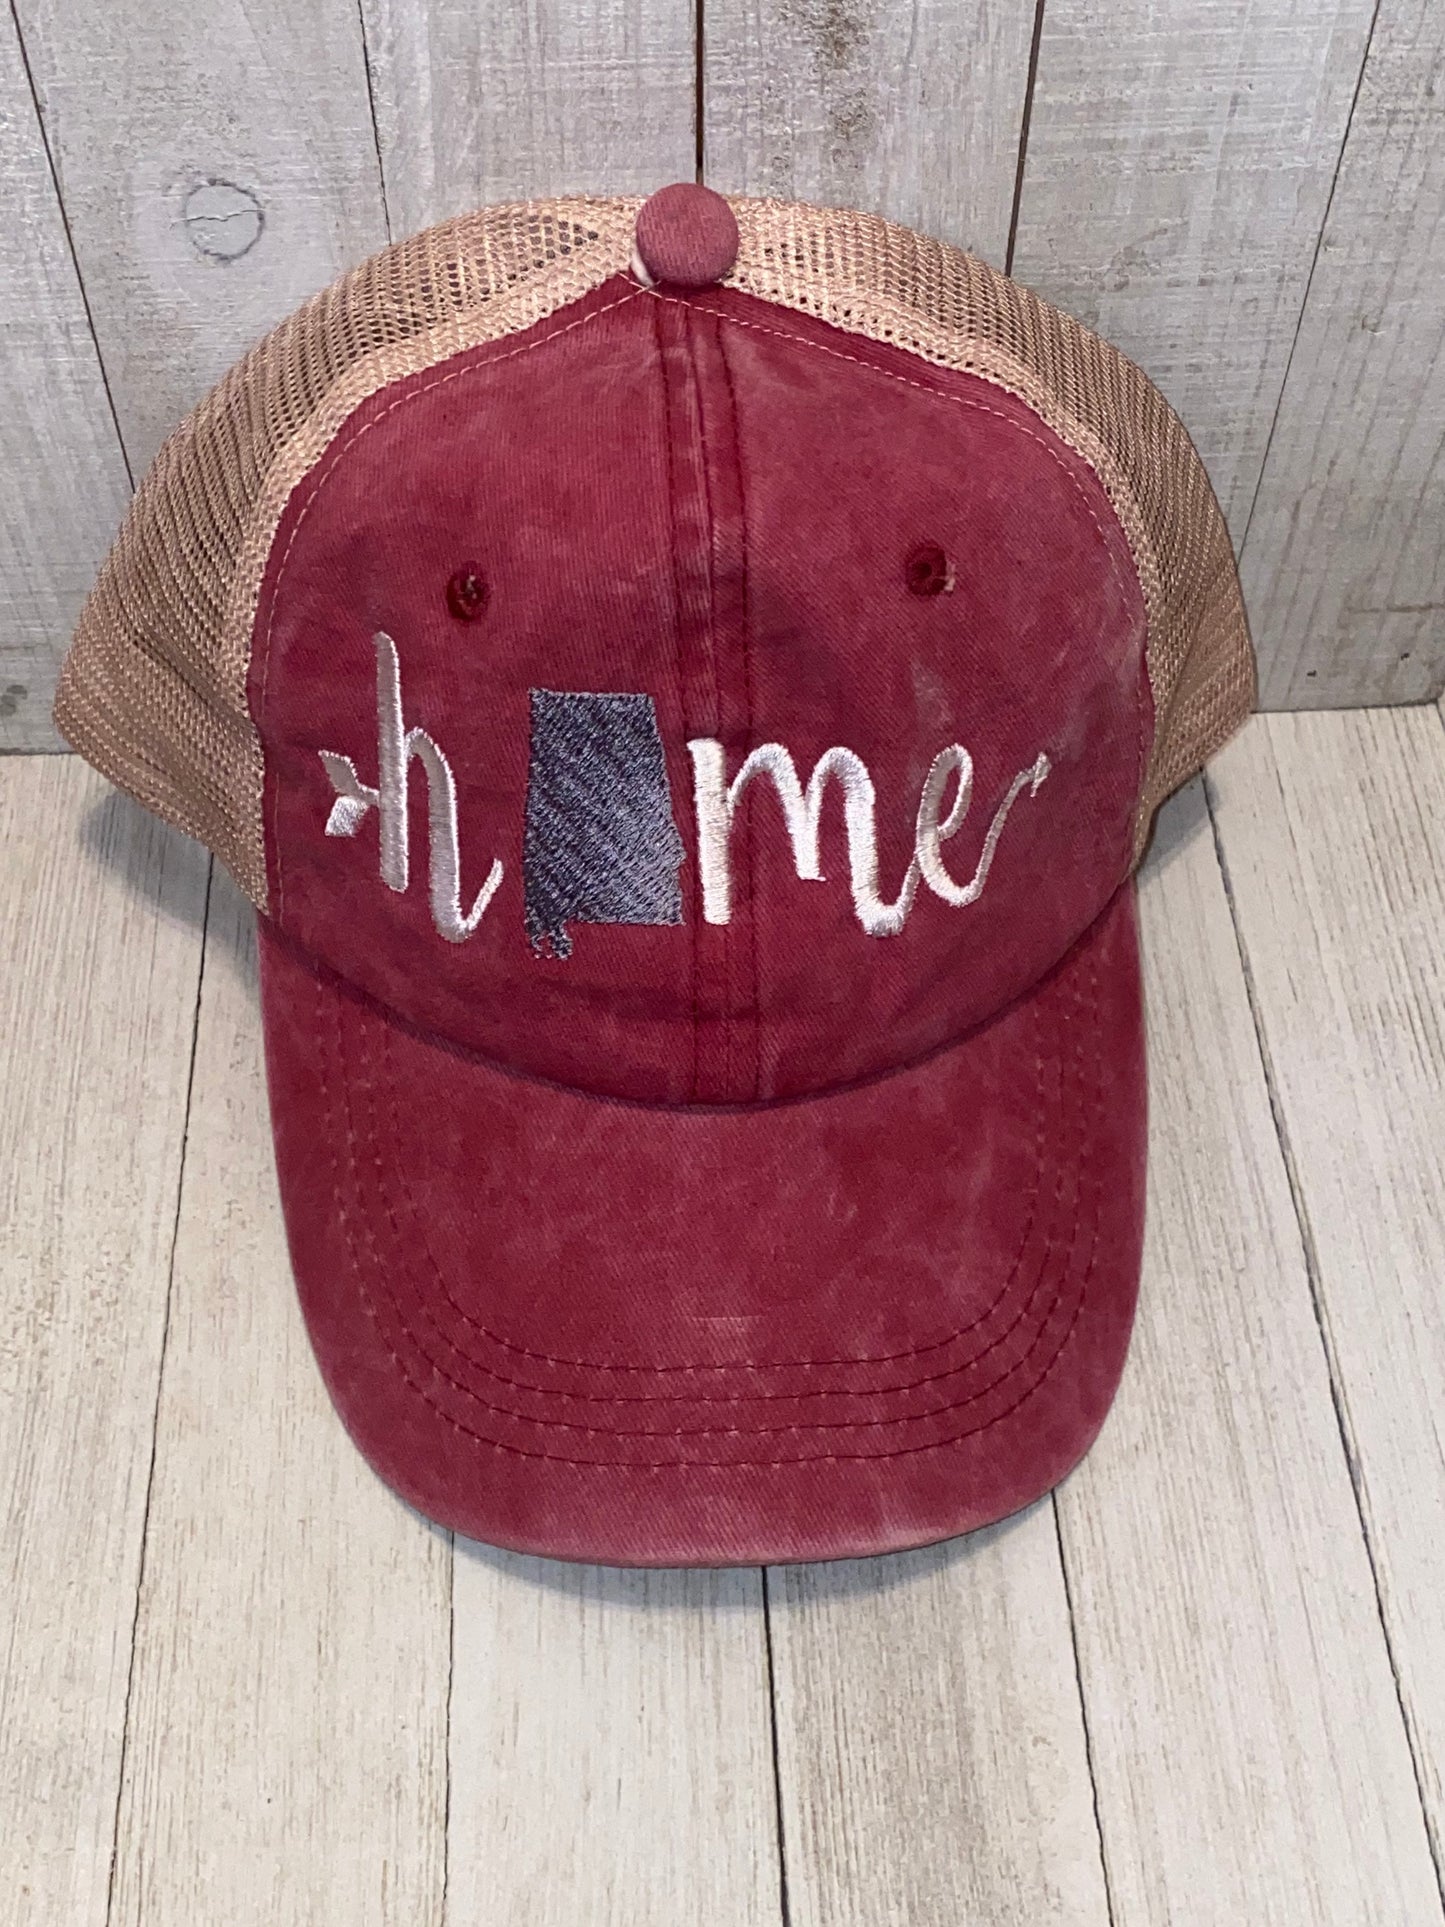 Home State Hat, Home Trucker, Embroidered hat